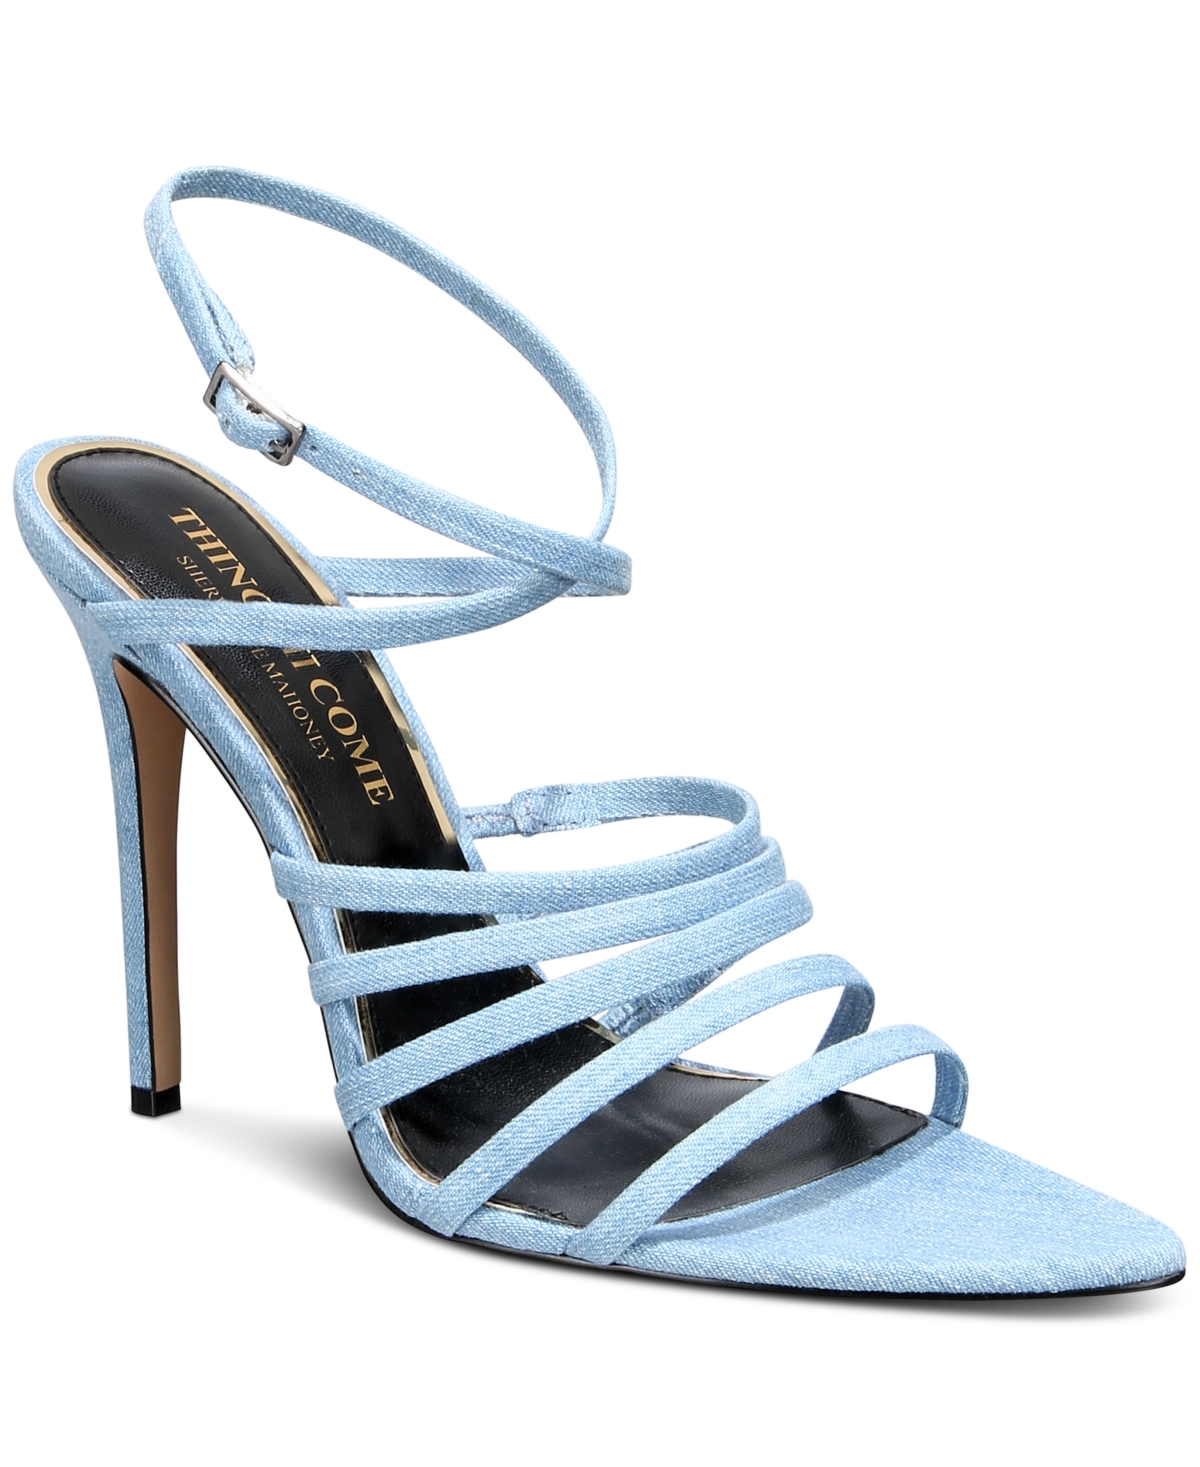 Things Ii Come Women's Salsa Luxurious Strappy Pointed-toe Pumps In Blue Jean Denim